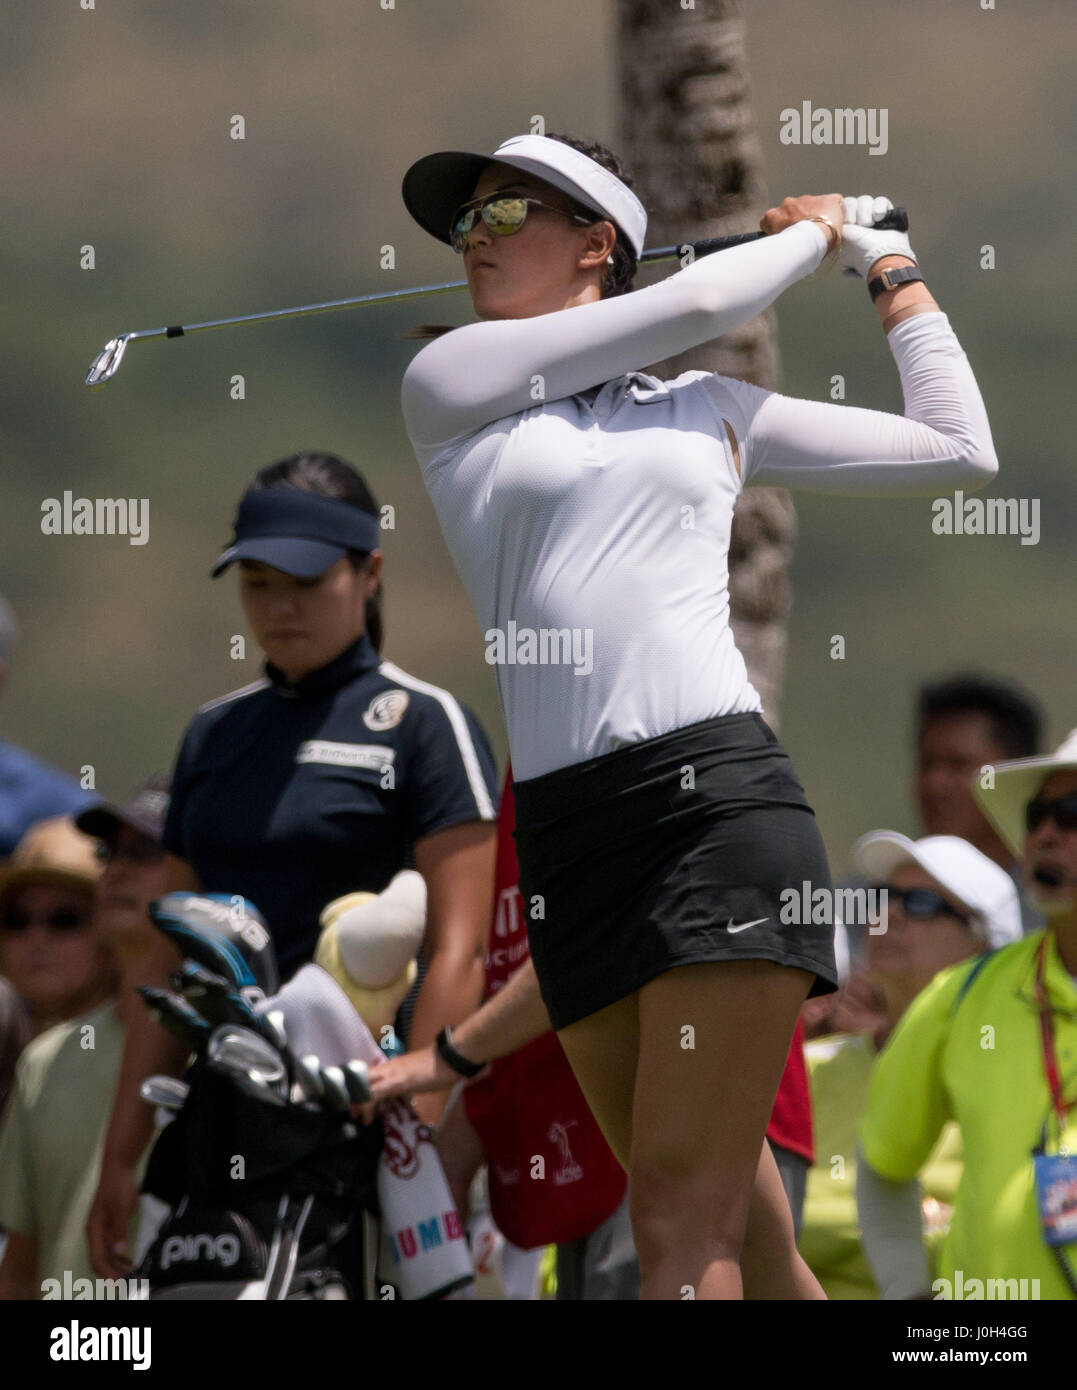 Honolulu, Hawaii, USA. 12th Apr, 2017. during Round 1 of the LPGA LOTTE Championship presented by Hershey at the Ko Olina Golf Club in Honolulu, Hawaii. Steven Erler/CSMApril 12, 2017: Michelle Wie tees off at the 8th hole during Round 1 of the LPGA LOTTE Championship presented by Hershey at the Ko Olina Golf Club in Honolulu, Hawaii. Wie ended at 1-under par and tied for 47th place. Steven Erler/CSM/Alamy Live News Stock Photo